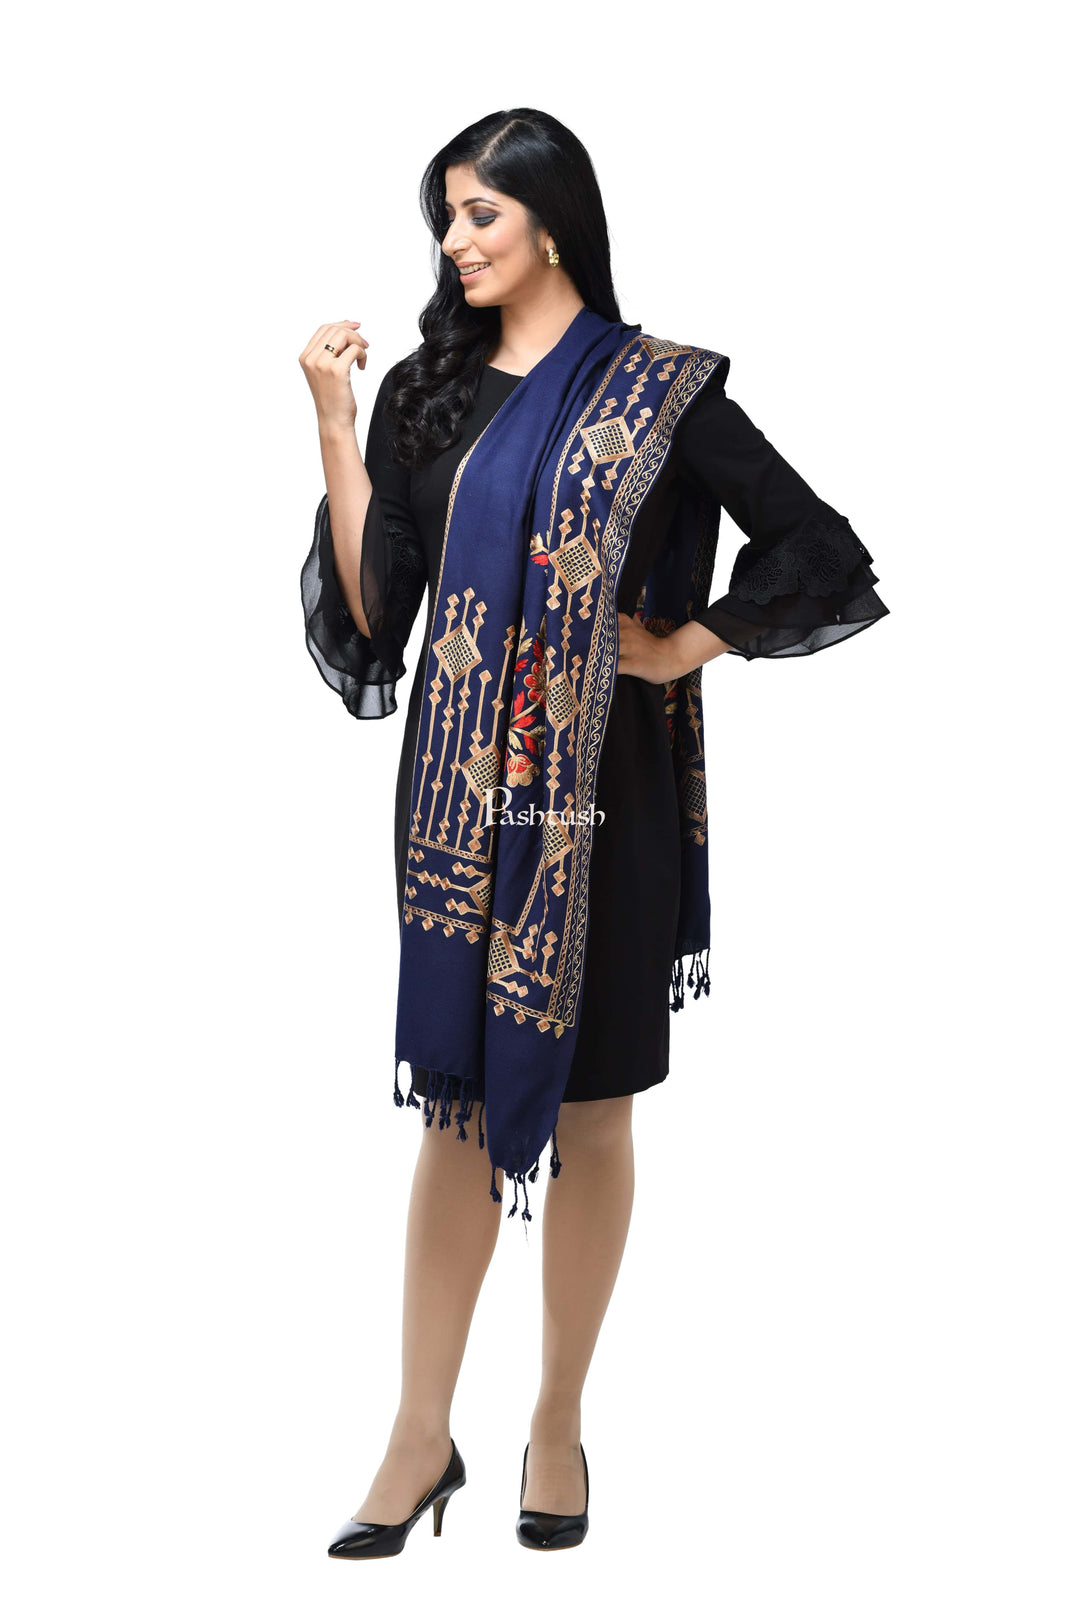 Pashwool Womens Stoles and Scarves Scarf Pashwool Womens Kashmiri Embroidery Stole, Soft And Warm, Woollen Stole, Navy Blue